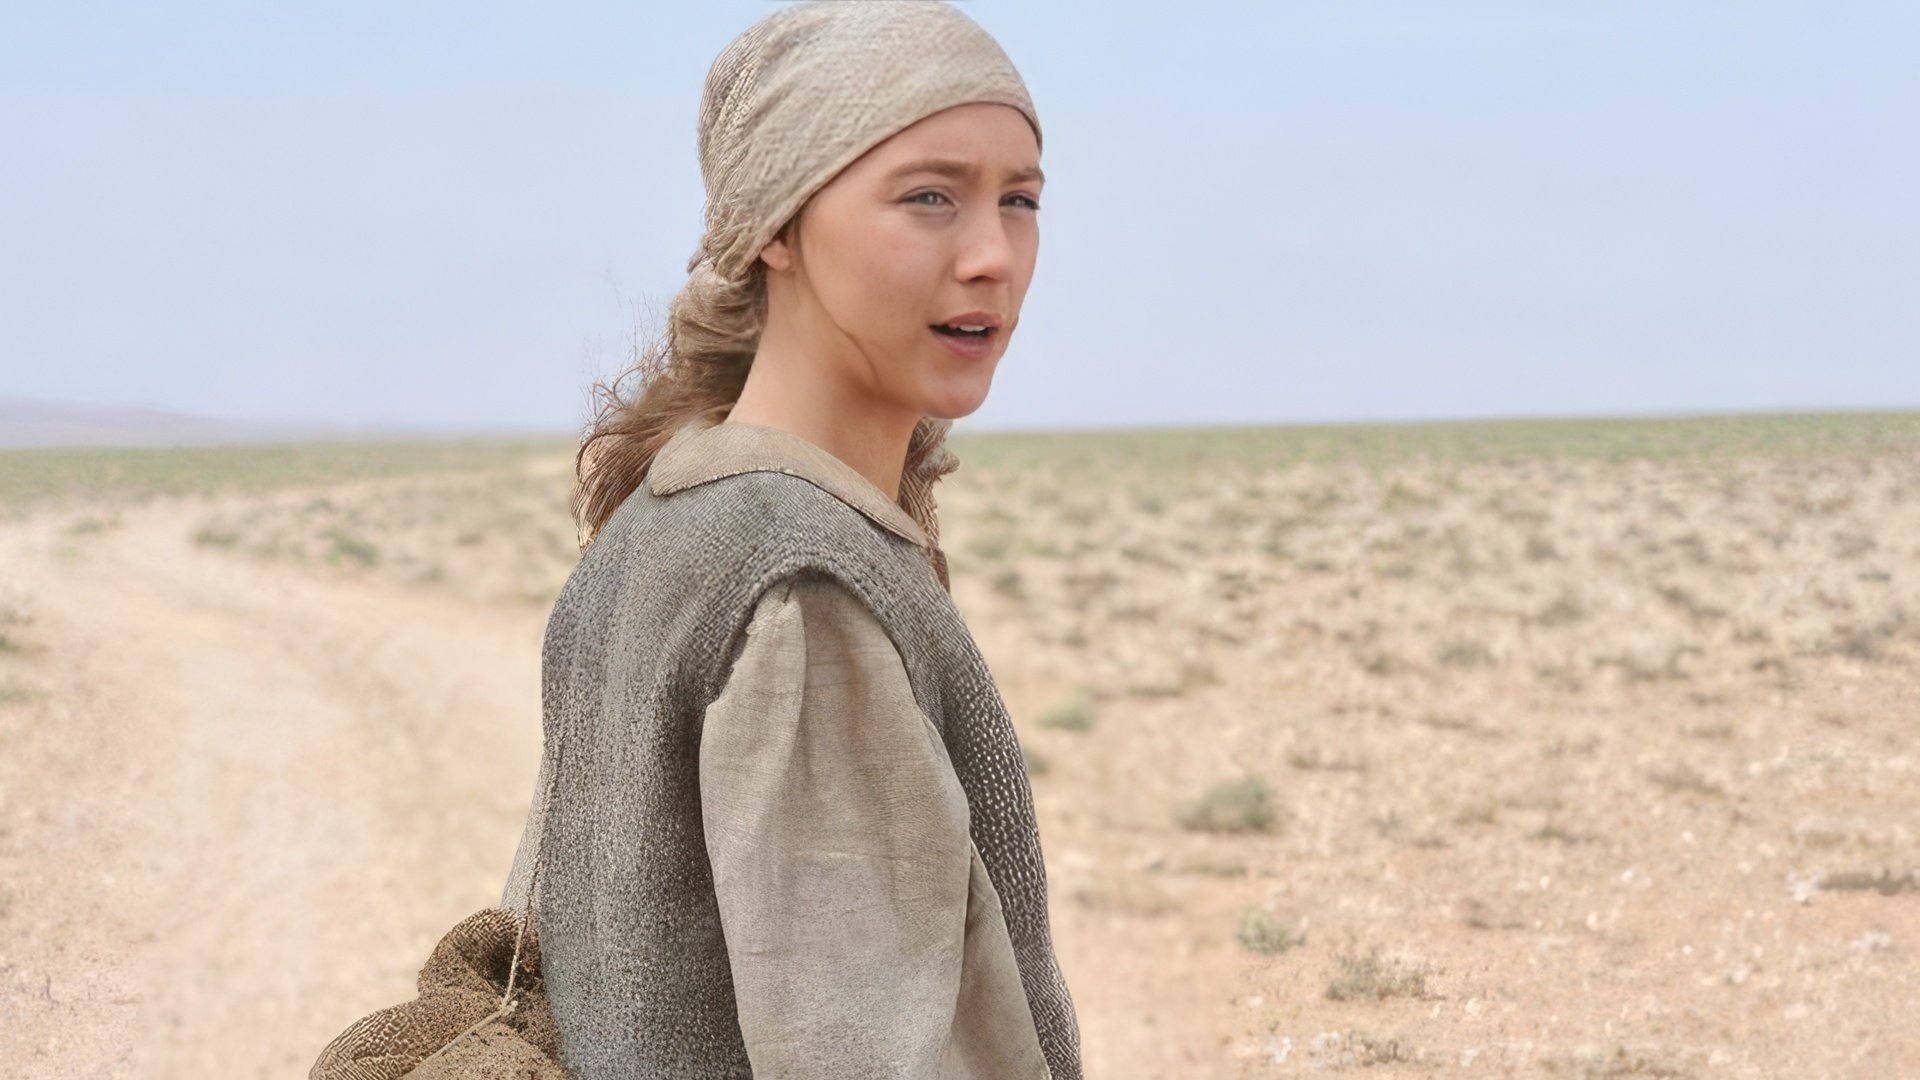  Saoirse Ronan during the filming of The Way Back